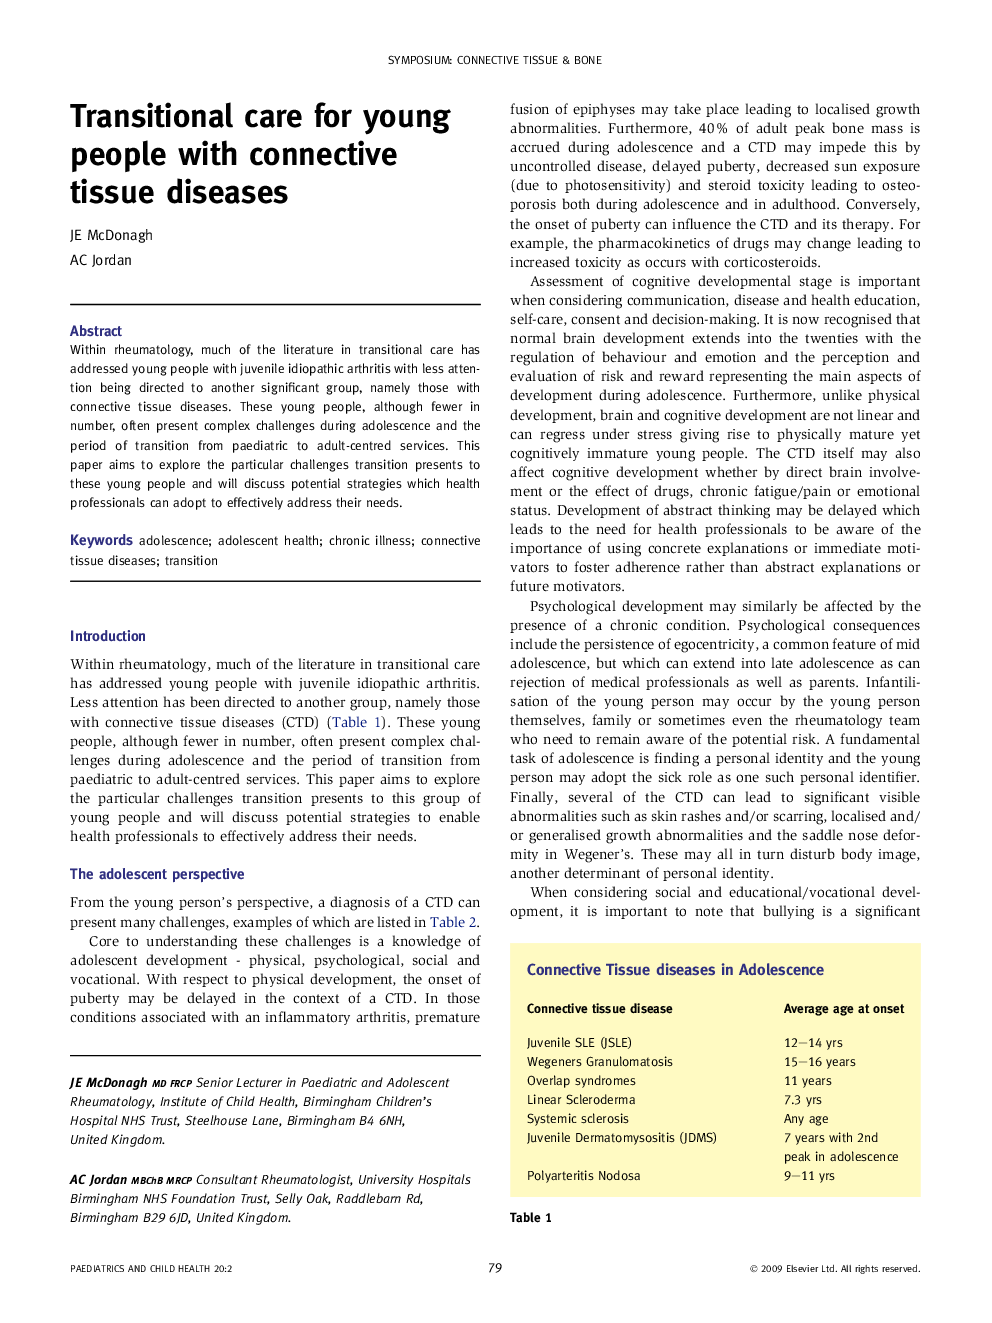 Transitional care for young people with connective tissue diseases